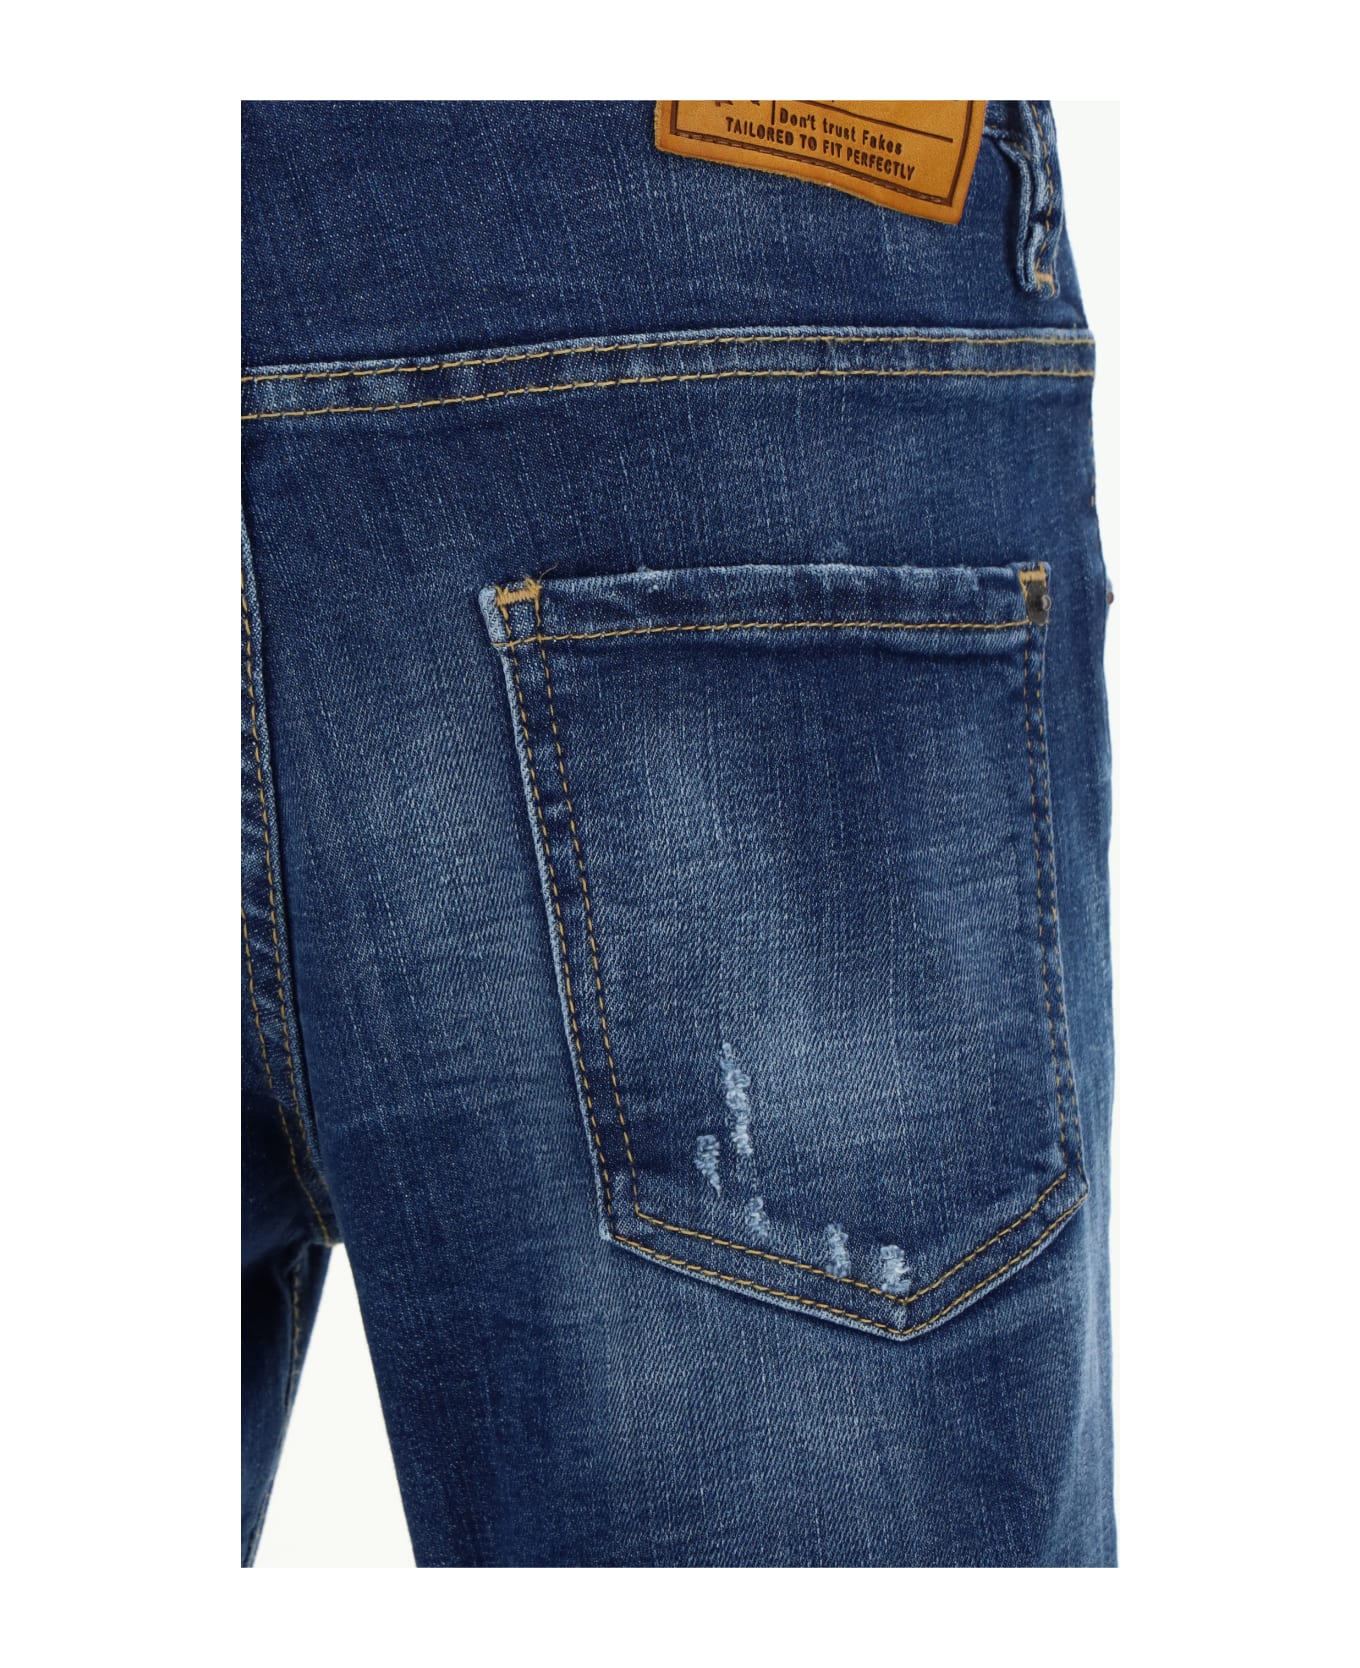 Dsquared2 Super Twinky Jeans - Navy Blue